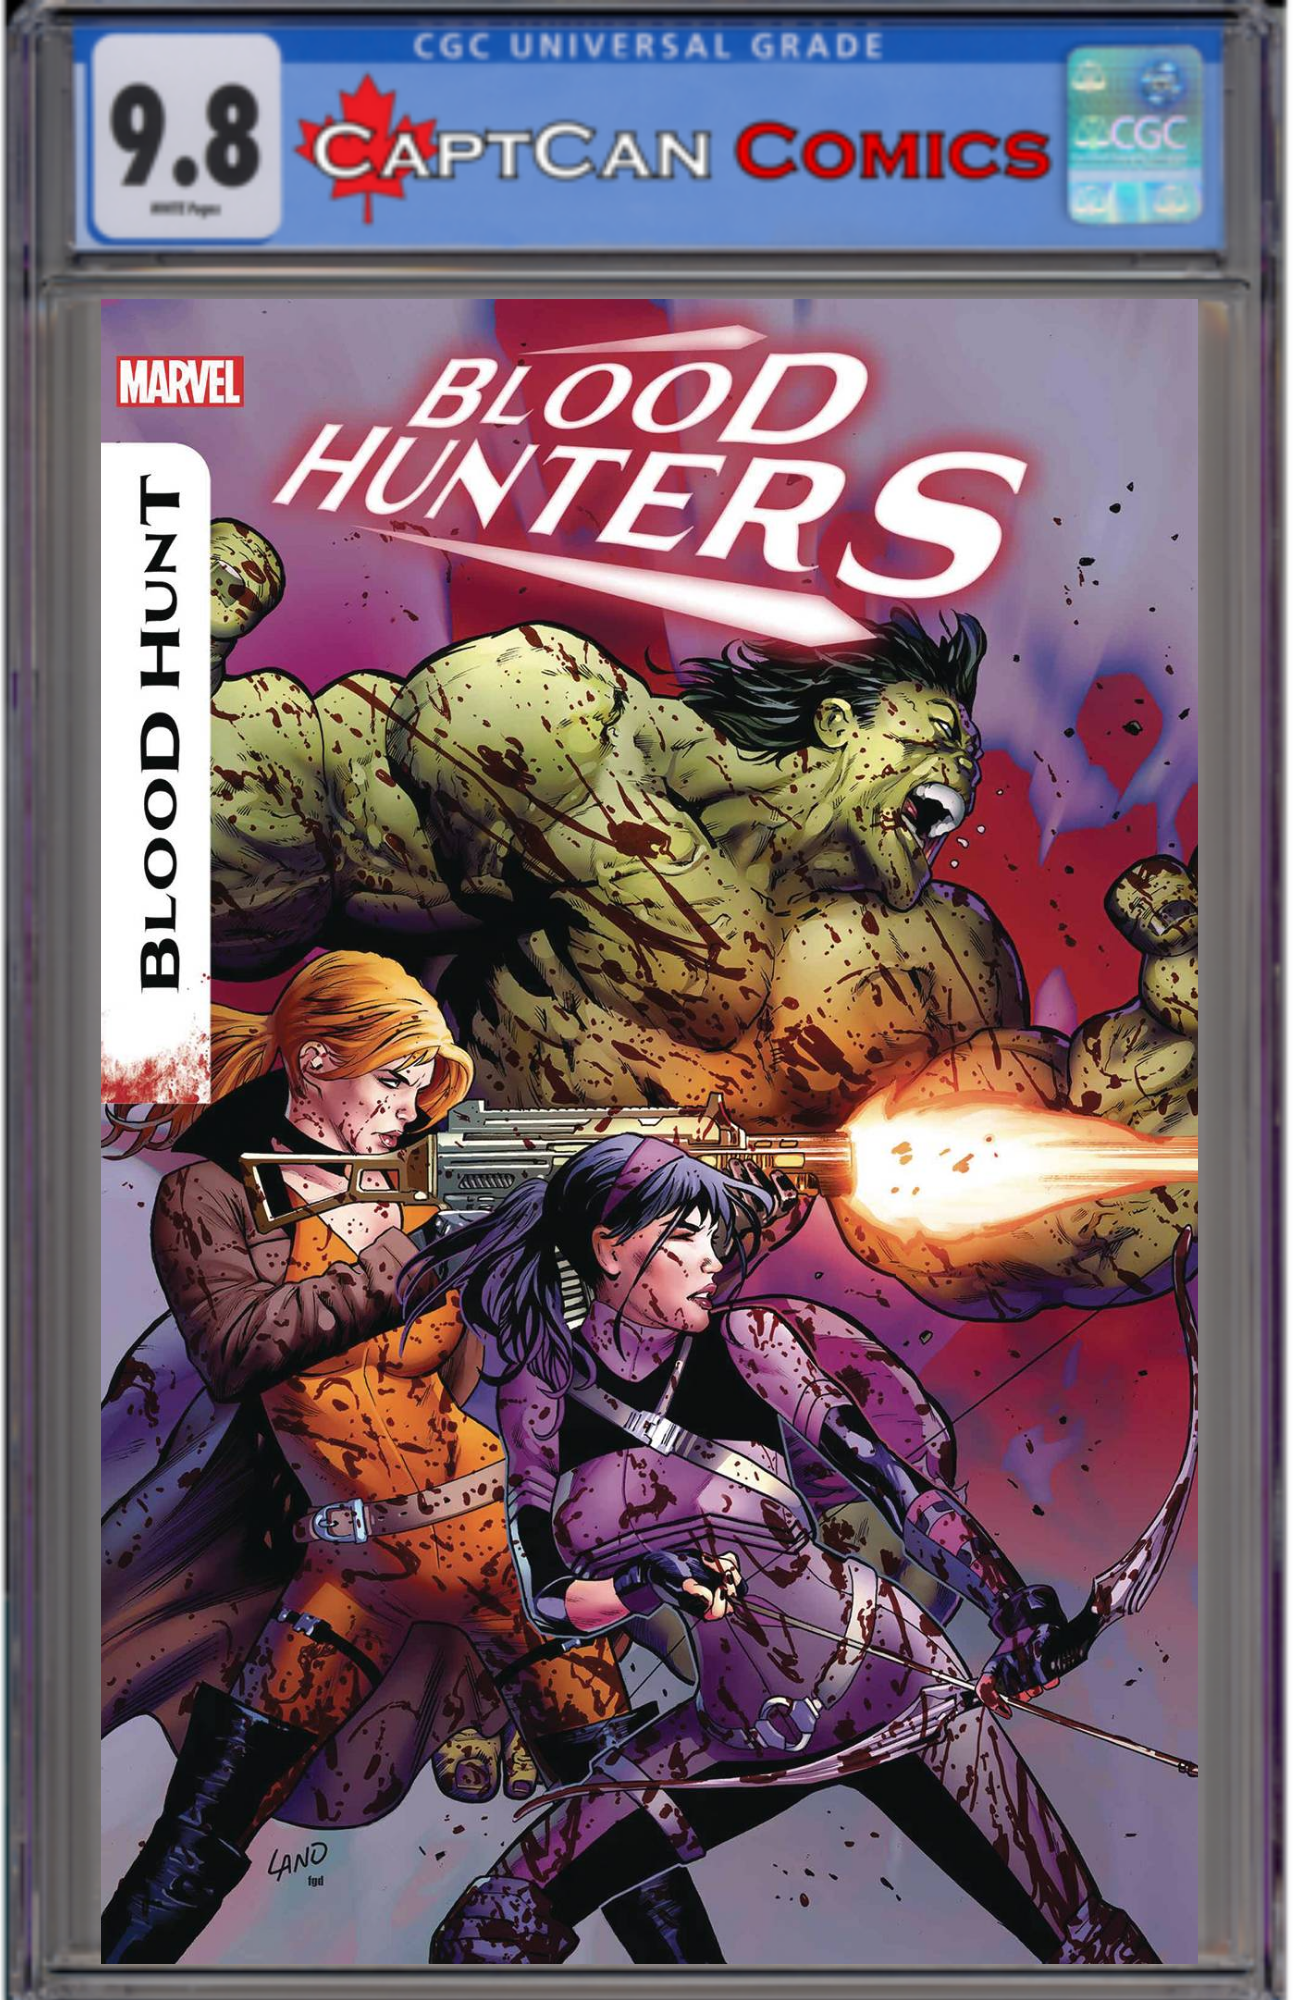 BLOOD HUNTERS #2 (OF 4)